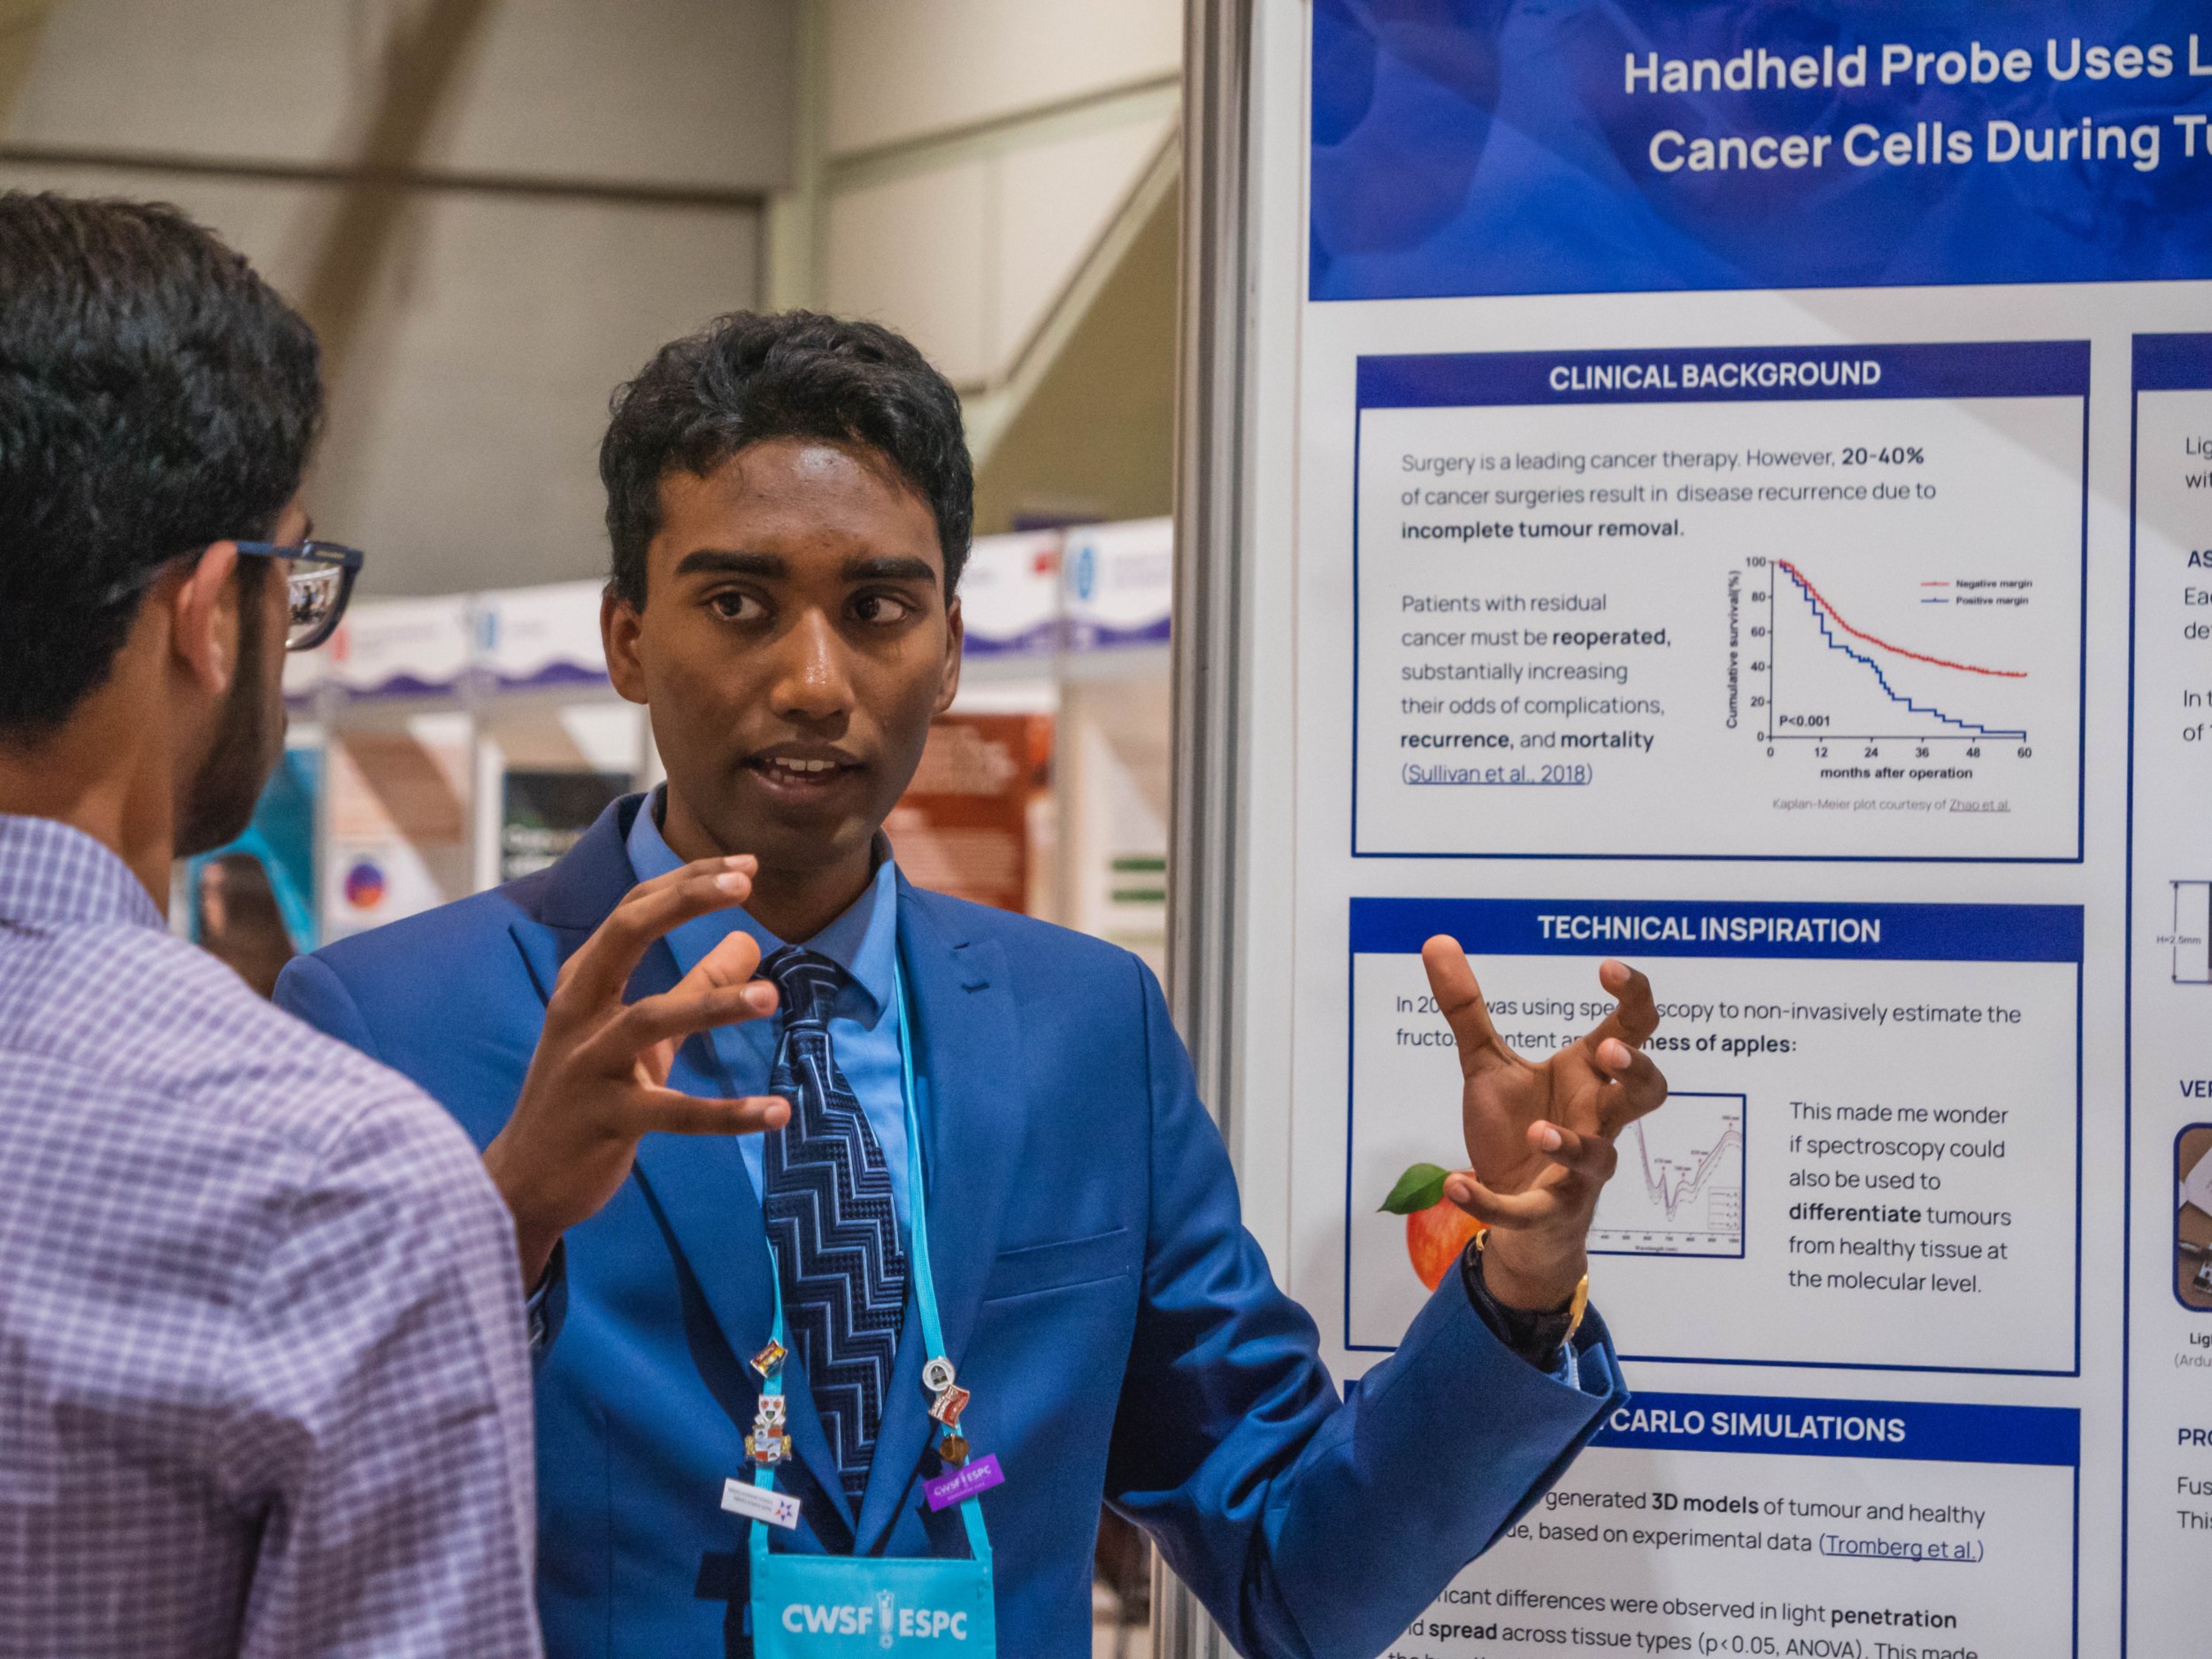 Grade 12 student Aaryan Harshith explains his LightIR project to develop a handheld device that could help detect and remove elusive cancer cells remaining after surgery to remove tumours. (Photo: Youth Science Canada)